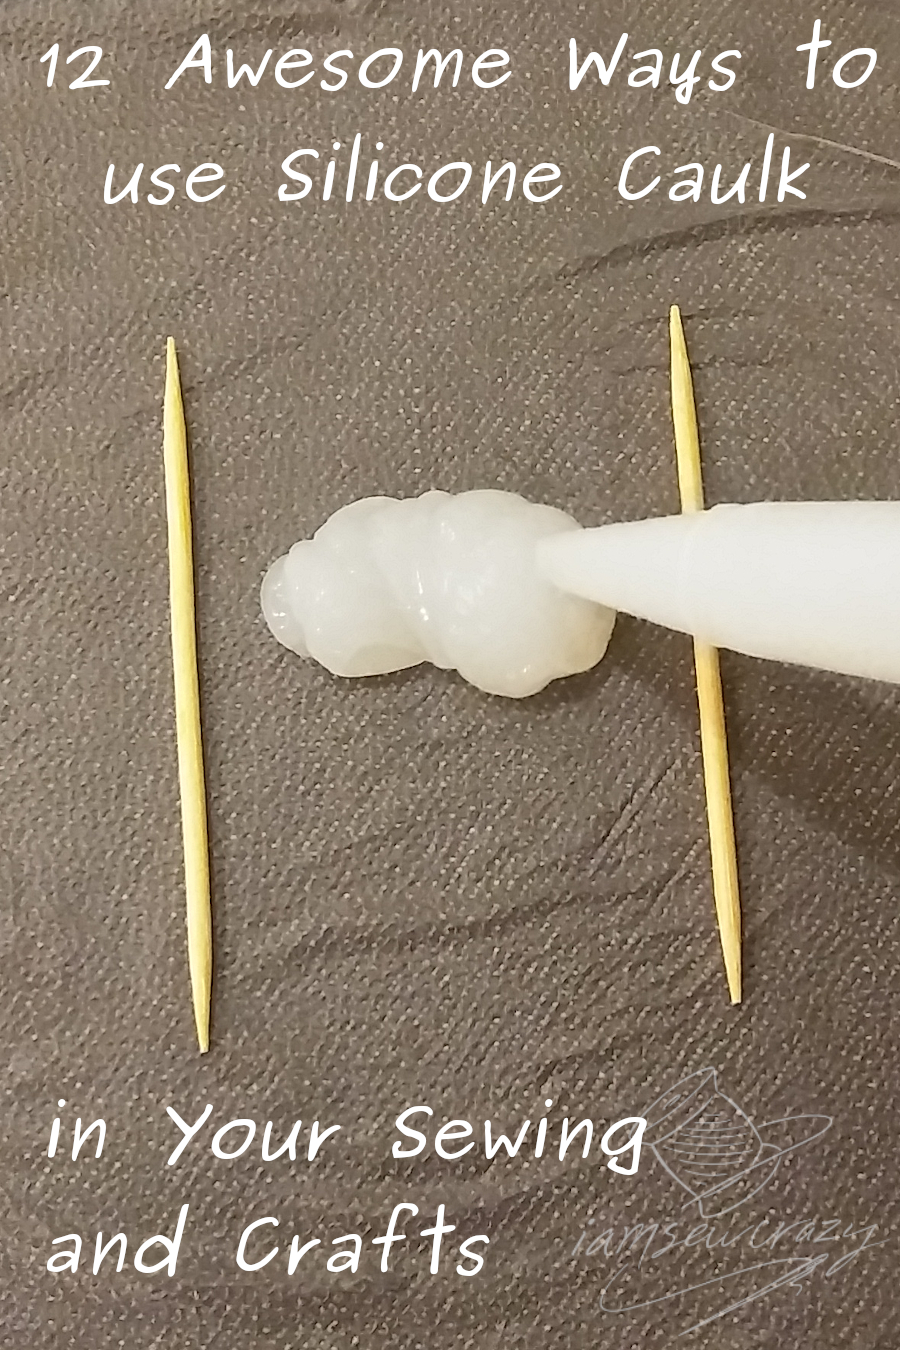 silicone on plastic between toothpicks with text overlay: 12 awesome ways to use silicone caulk in sewing and crafts